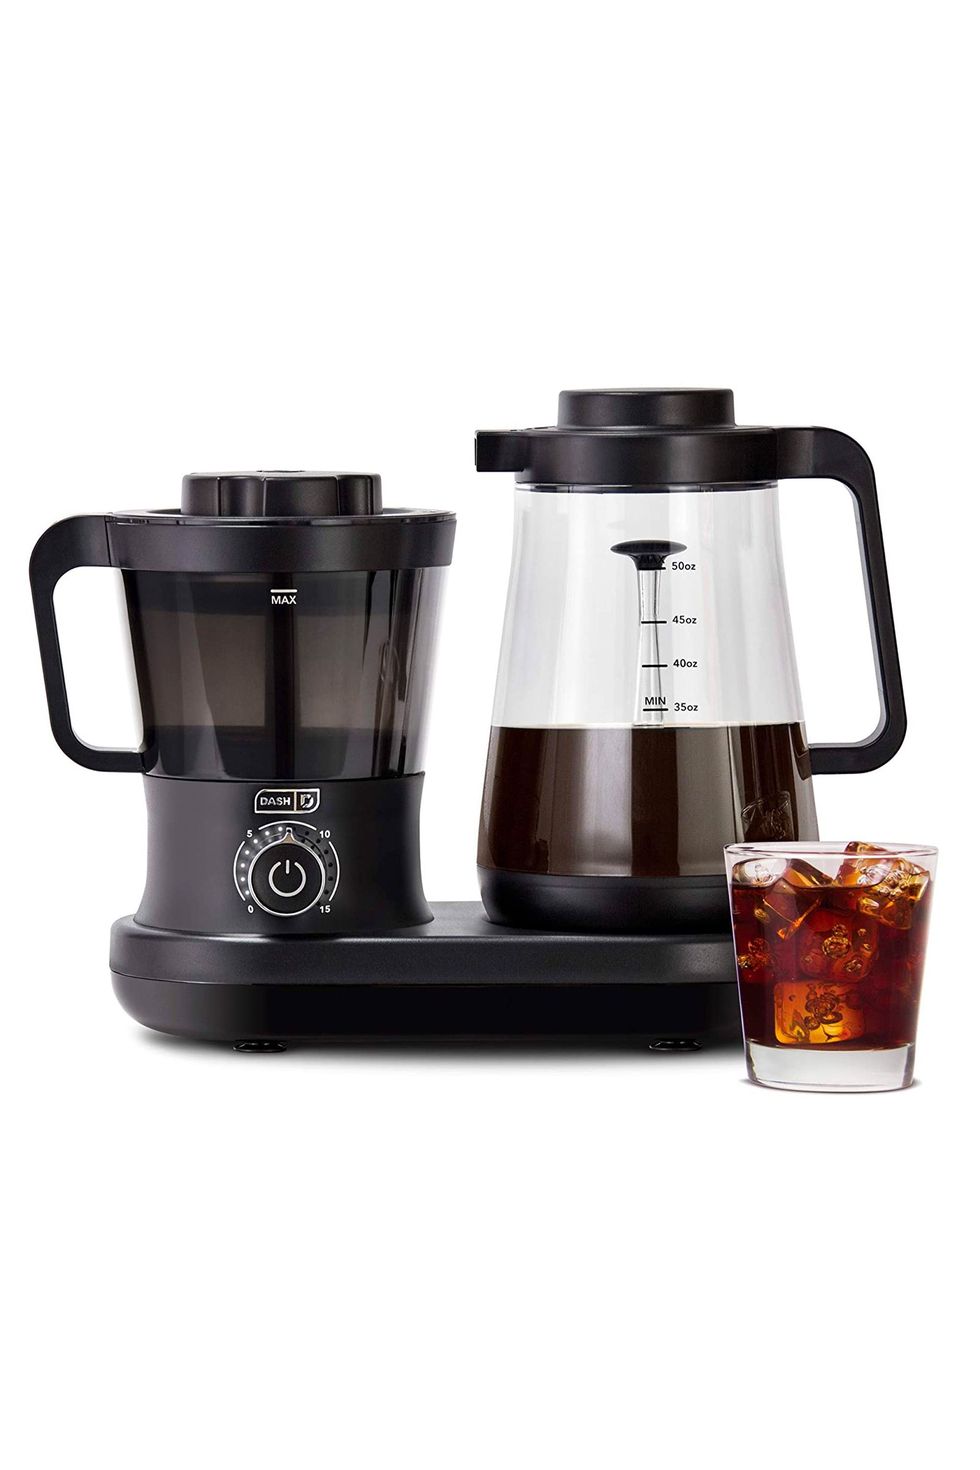 Coffee Gator Cold Brew Maker 1200 ml Ice Coffee or Iced Tea Makers